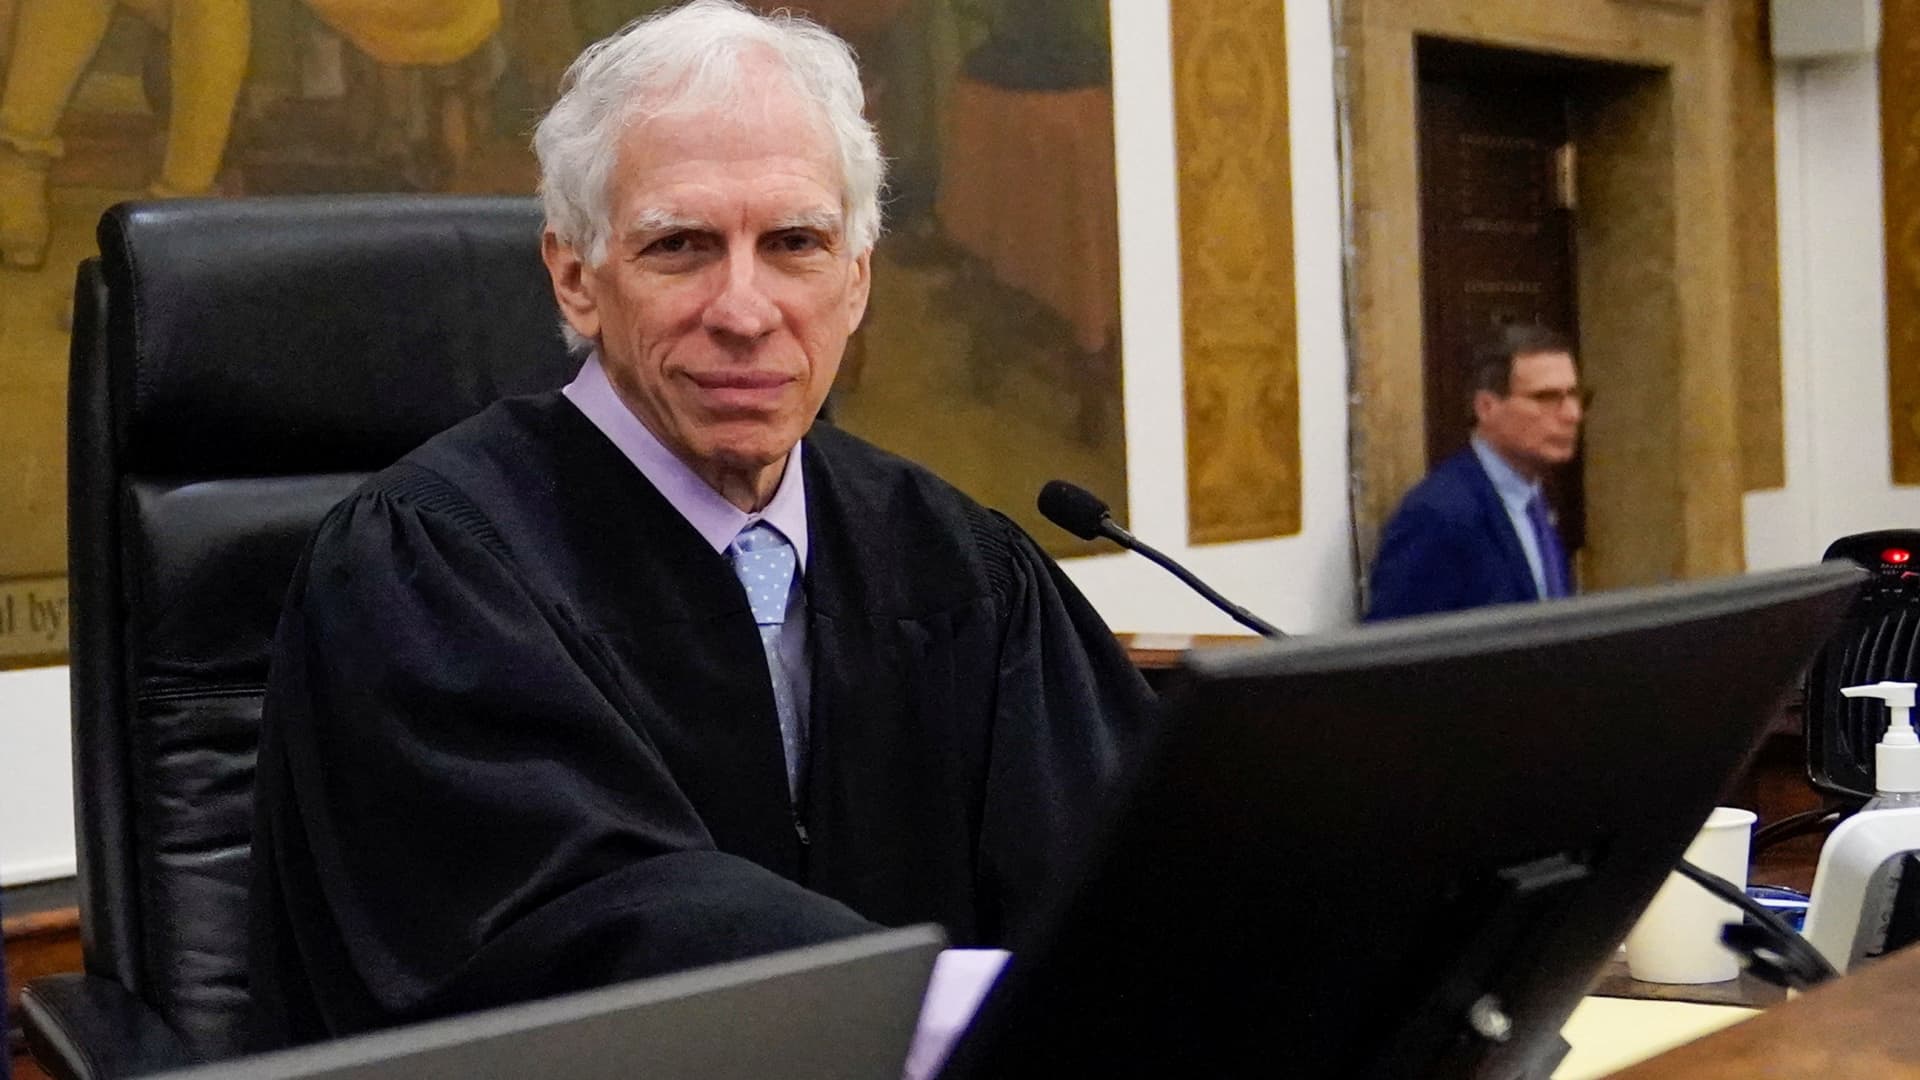 Judge Arthur Engoron is seen in the courtroom before the start of former U.S. President Donald Trump’s civil business fraud trial at the State Supreme Court building in New York on Oct. 4, 2023.